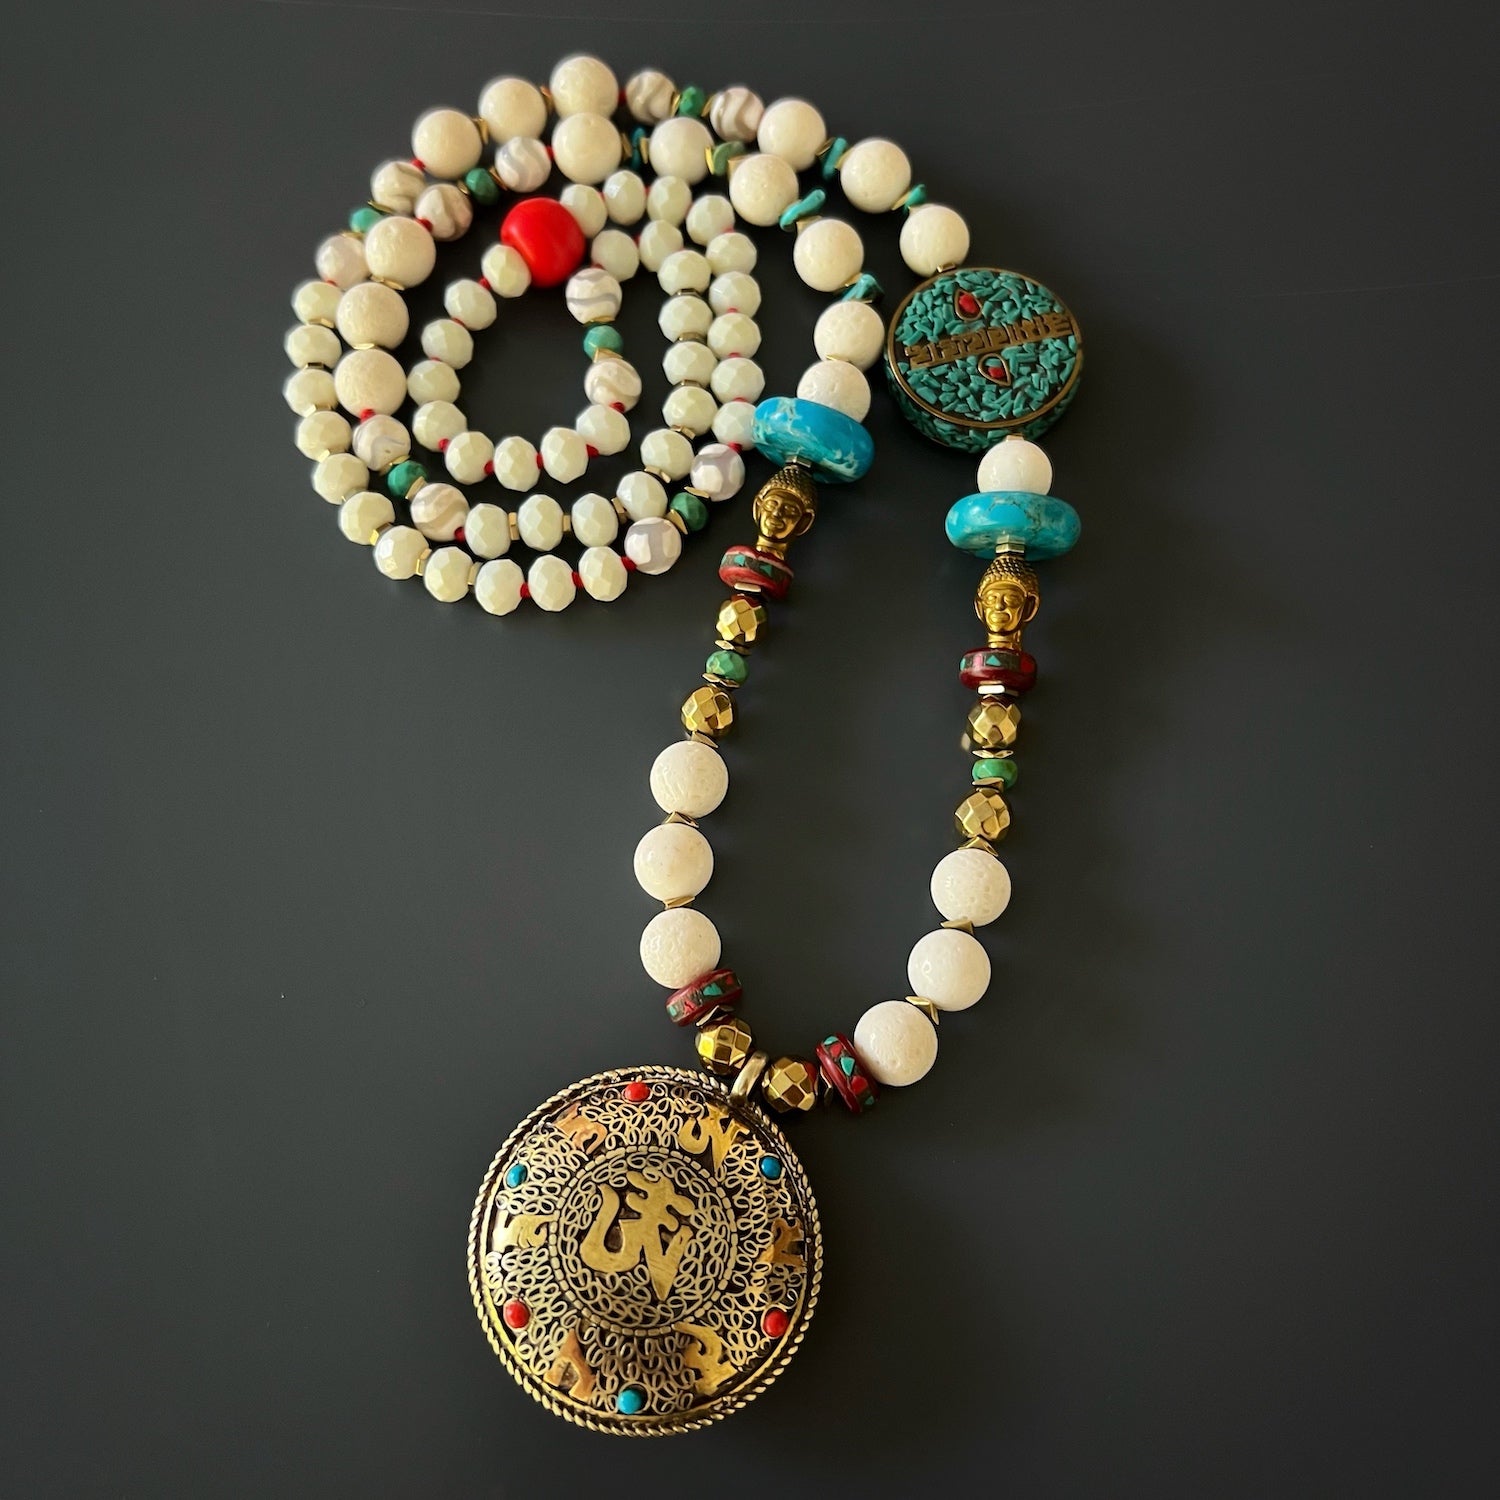 Radiate Peace: Natural stones and the powerful mantra on the Spiritual Buddha Mantra Necklace.